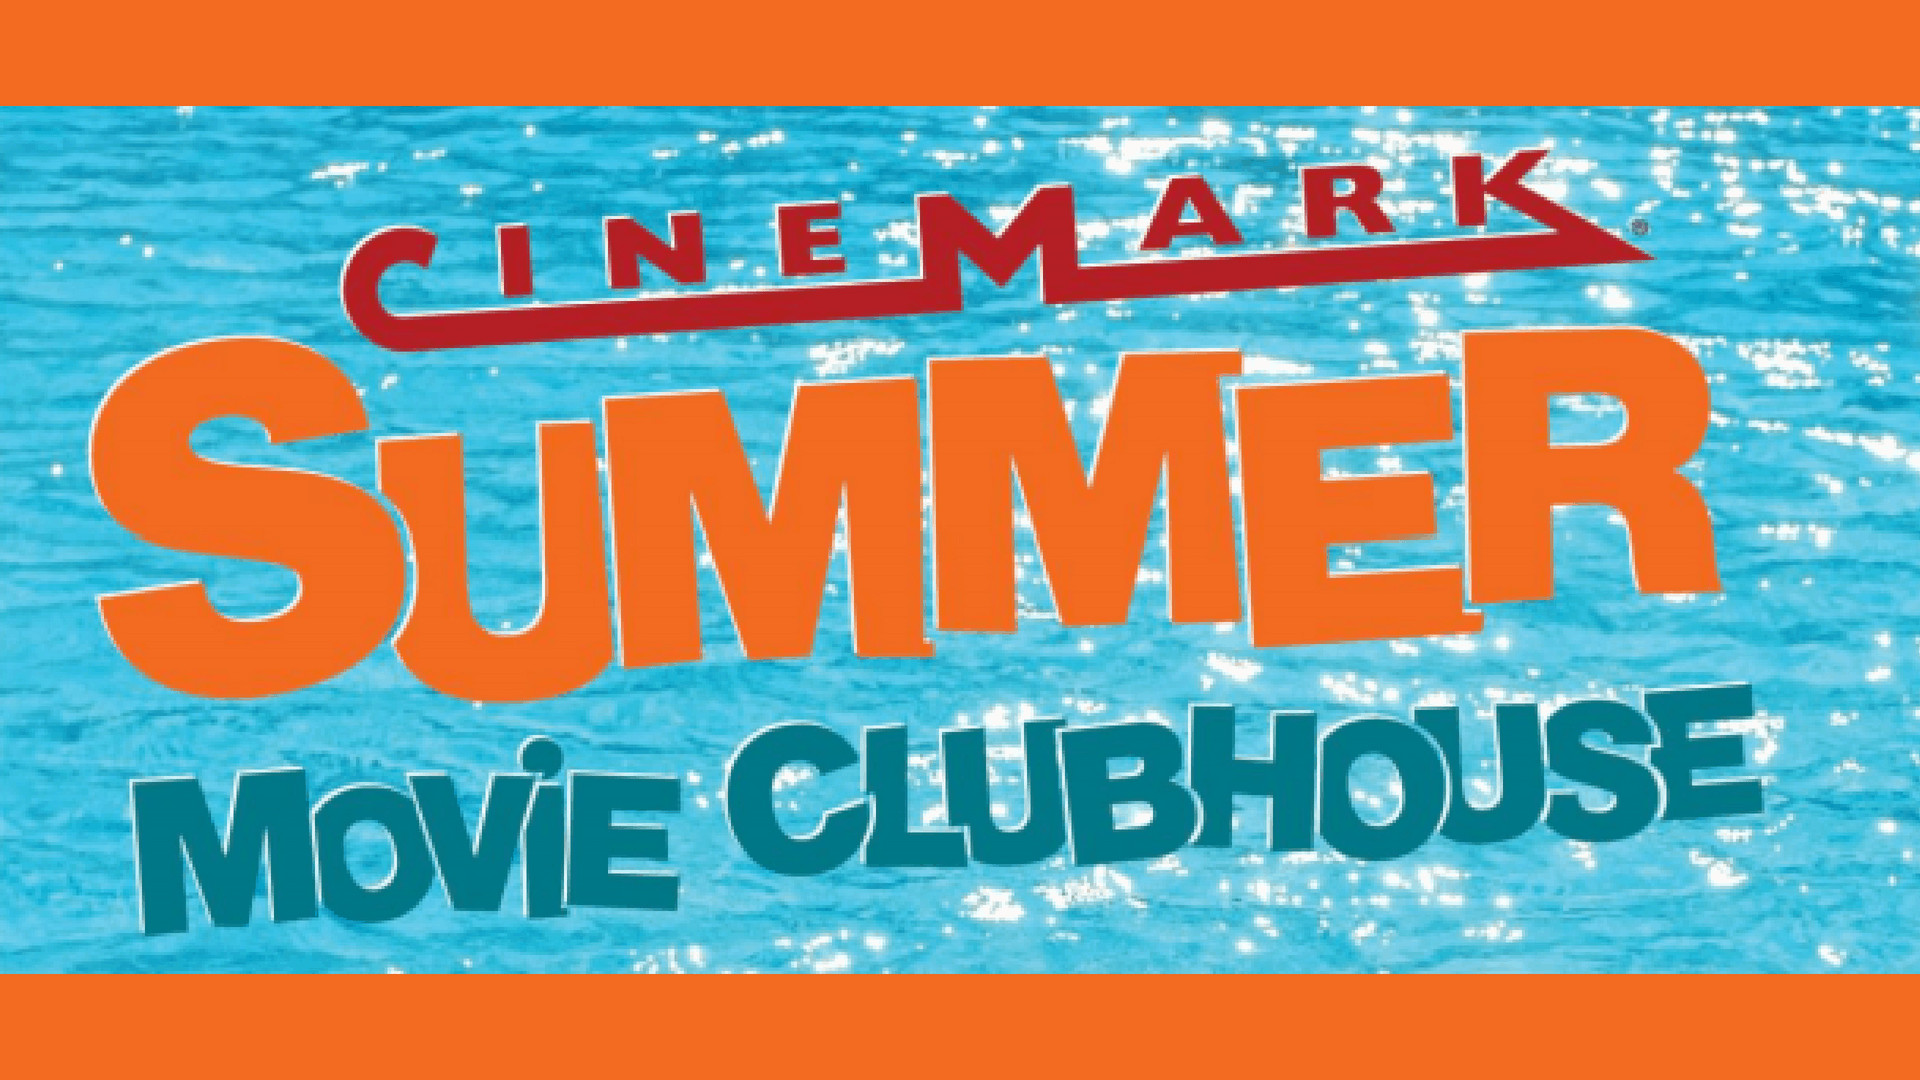 Cinemark Summer Movie Clubhouse $1 Movies for Kids in Jacksonville, Florida